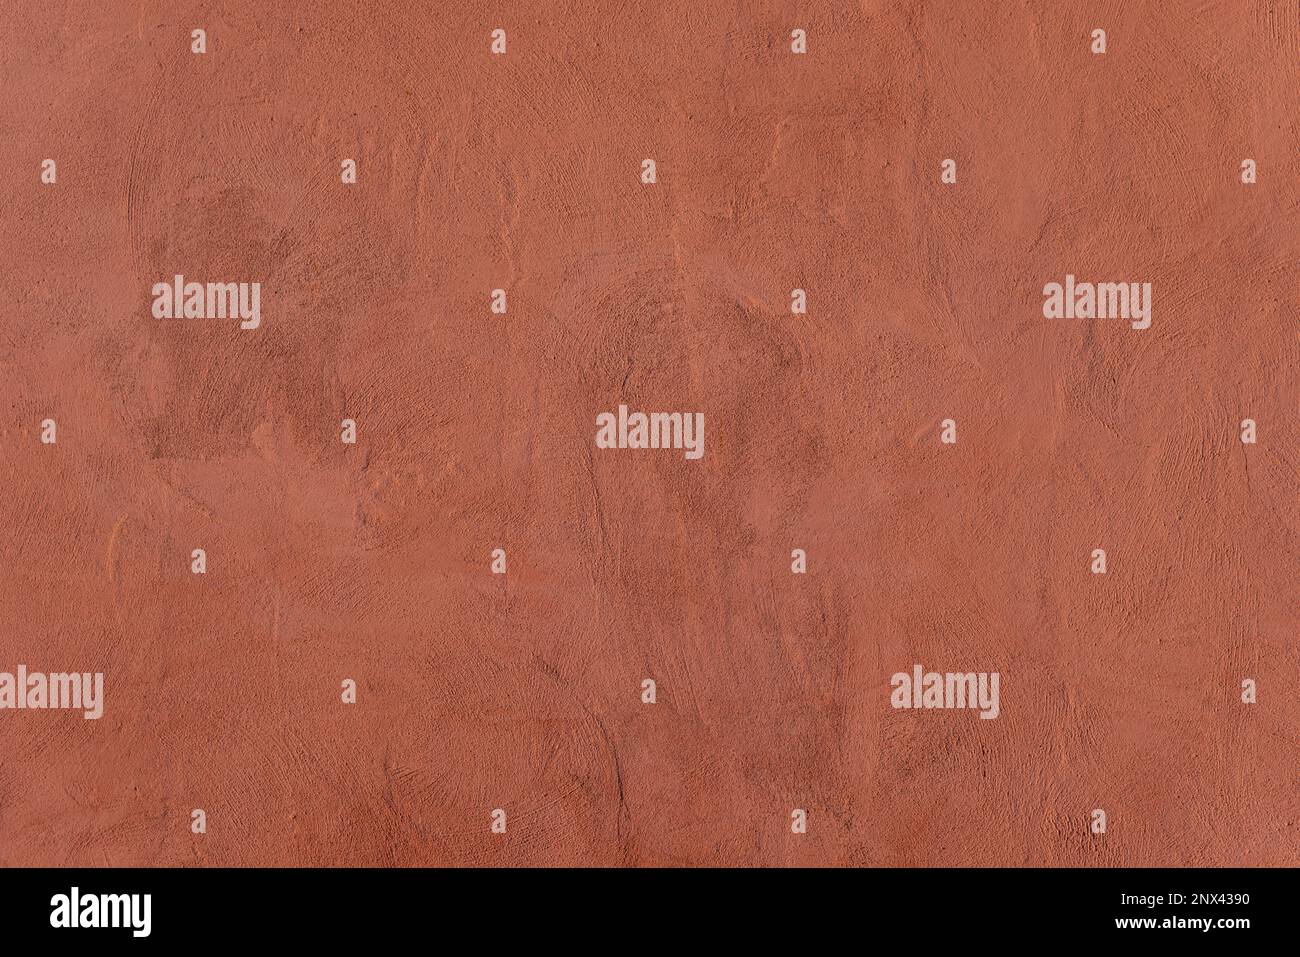 Texture of pink decorative plaster or concrete. Painted pink color stucco wall texture with copy space Stock Photo